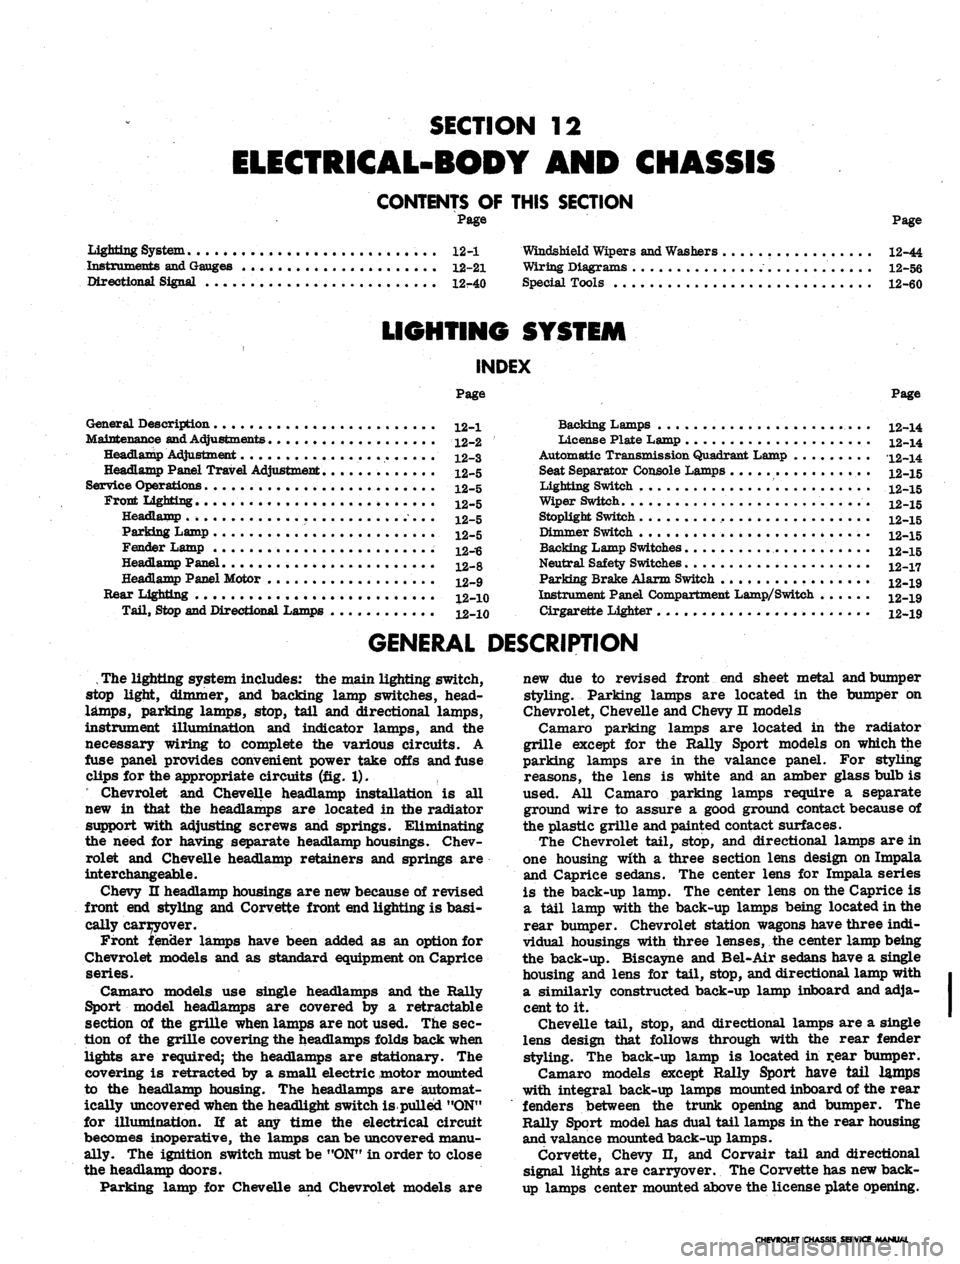 CHEVROLET CAMARO 1967 1.G Chassis Workshop Manual 
SECTION 12

ELECTRICAL-BODY AND CHASSIS

CONTENTS
 OF
 THIS
 SECTION

Page 
Page

System 12-1

Instruments and Gauges 12-21

Directional Signal 12r40 
Windshield Wipers and Washers 12-44

Wiring Diag